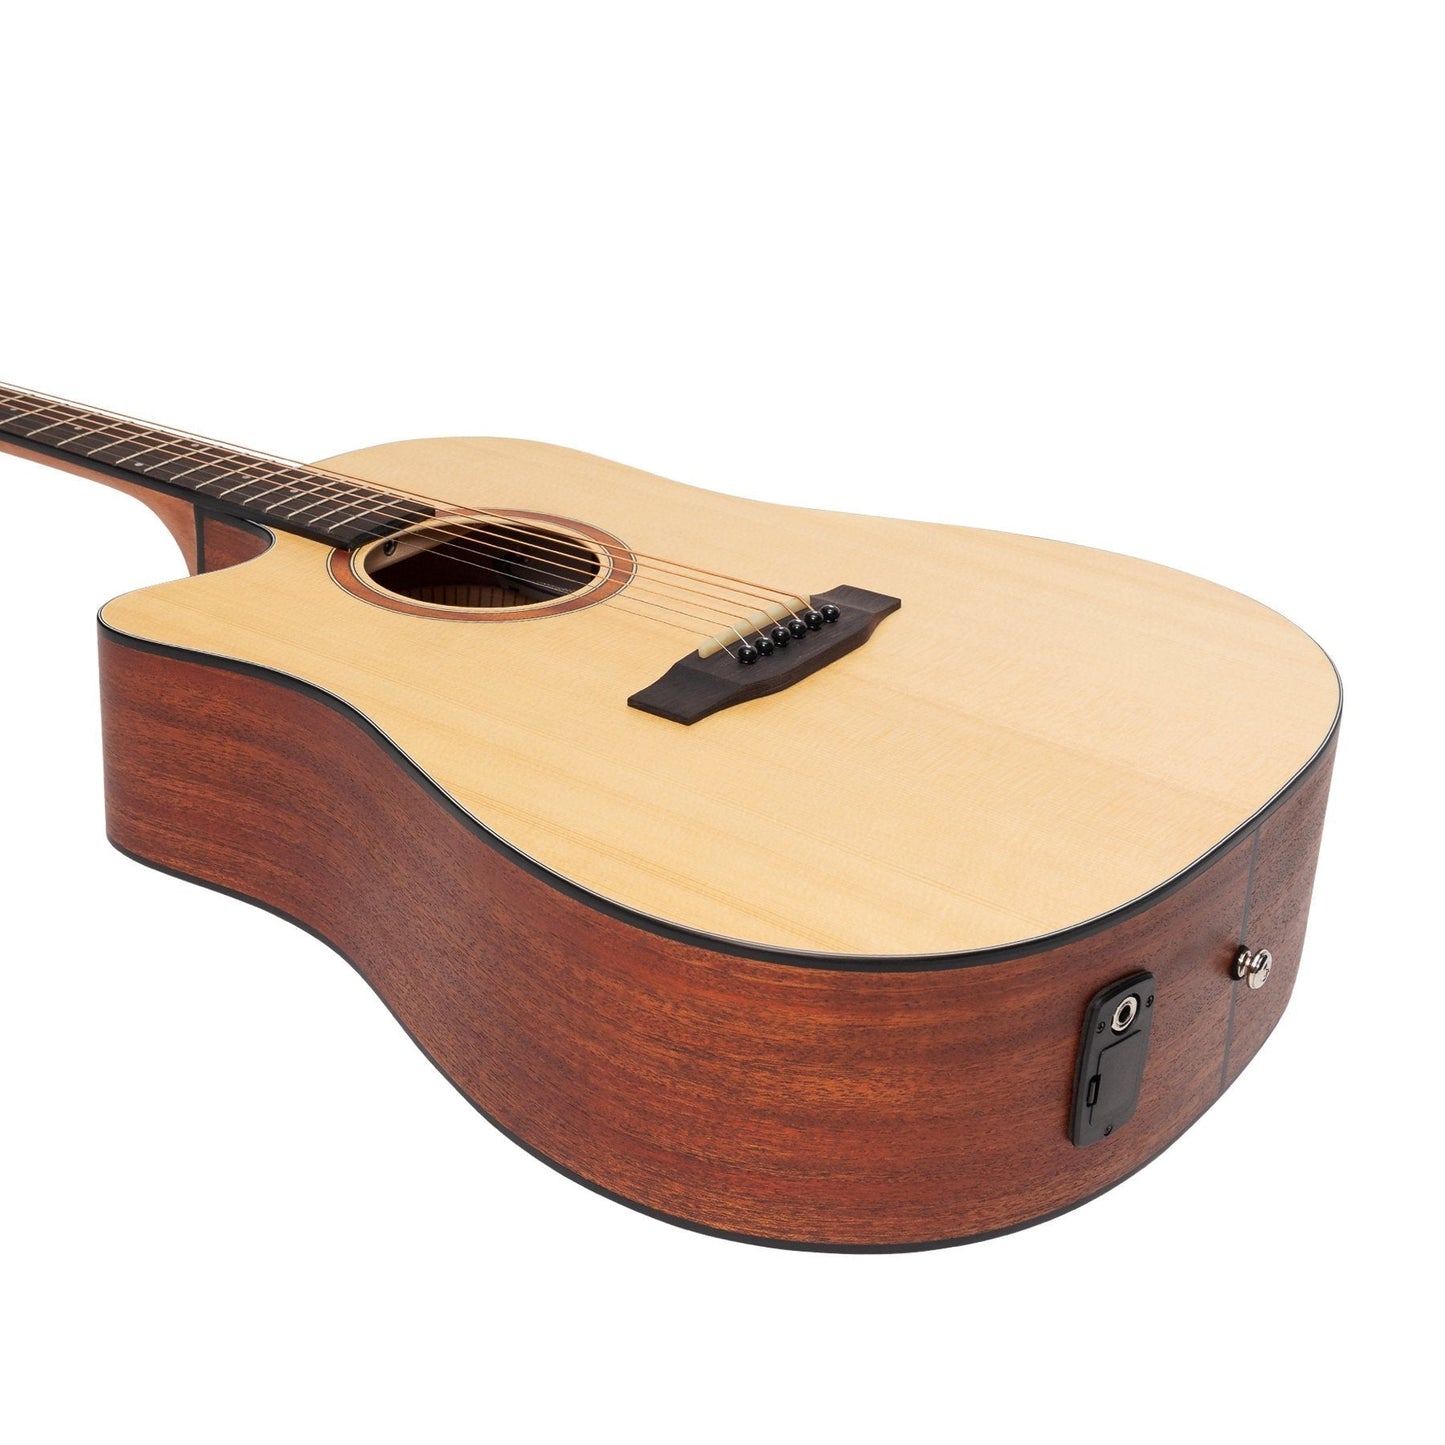 Martinez 'Natural Series' Left Handed Spruce Top Acoustic-Electric Dreadnought Cutaway Guitar (Open Pore)